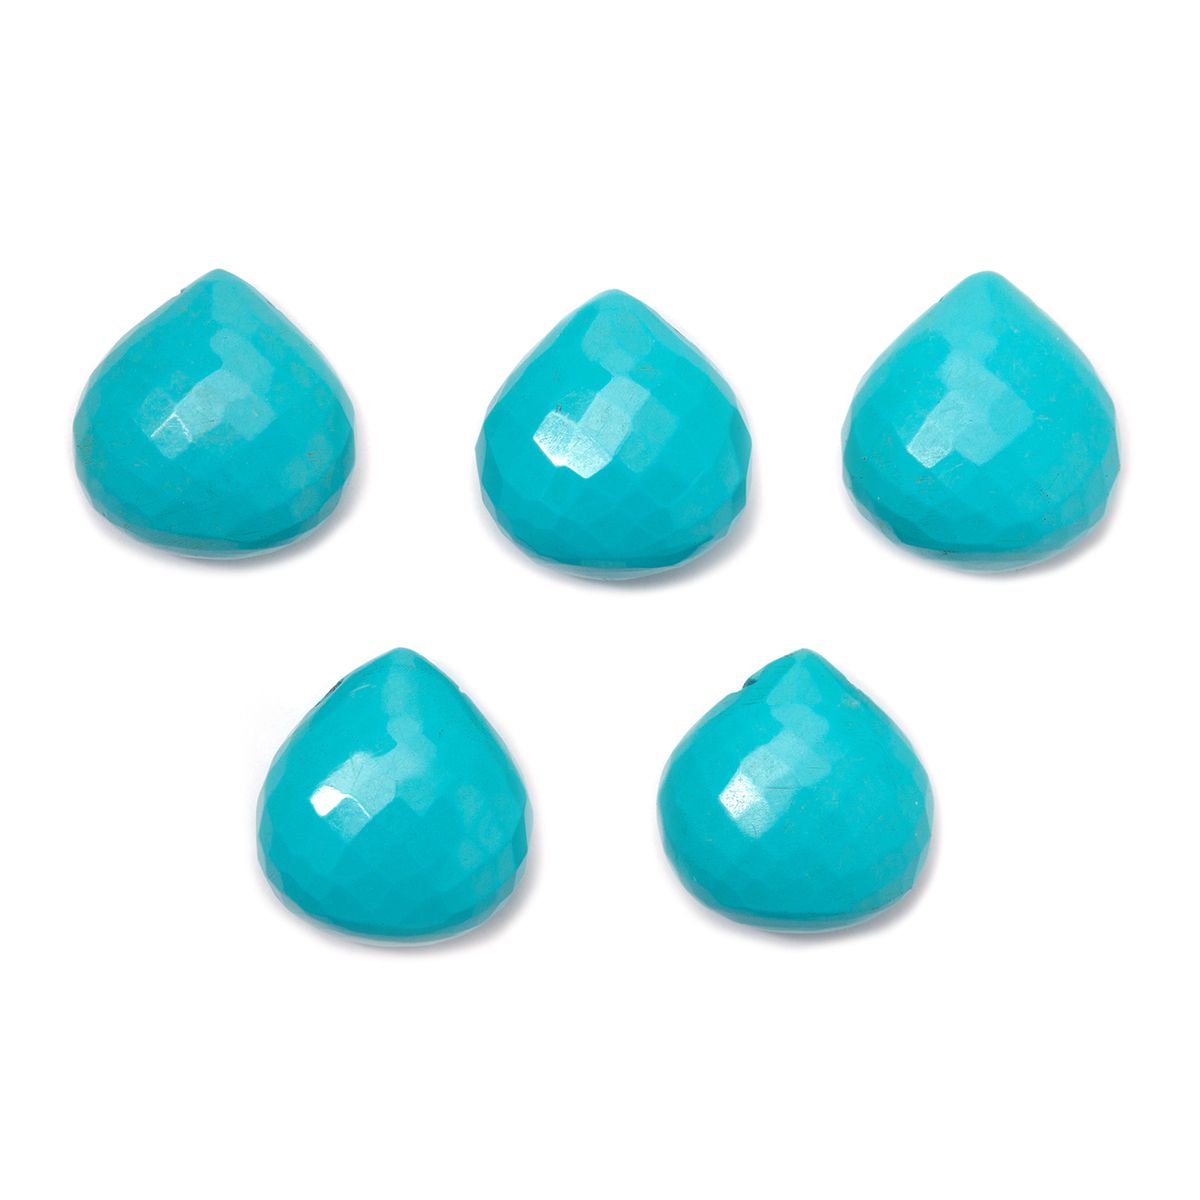 Sleeping Beauty Turquoise Faceted Heart Briolette Beads - Approx 11mm 